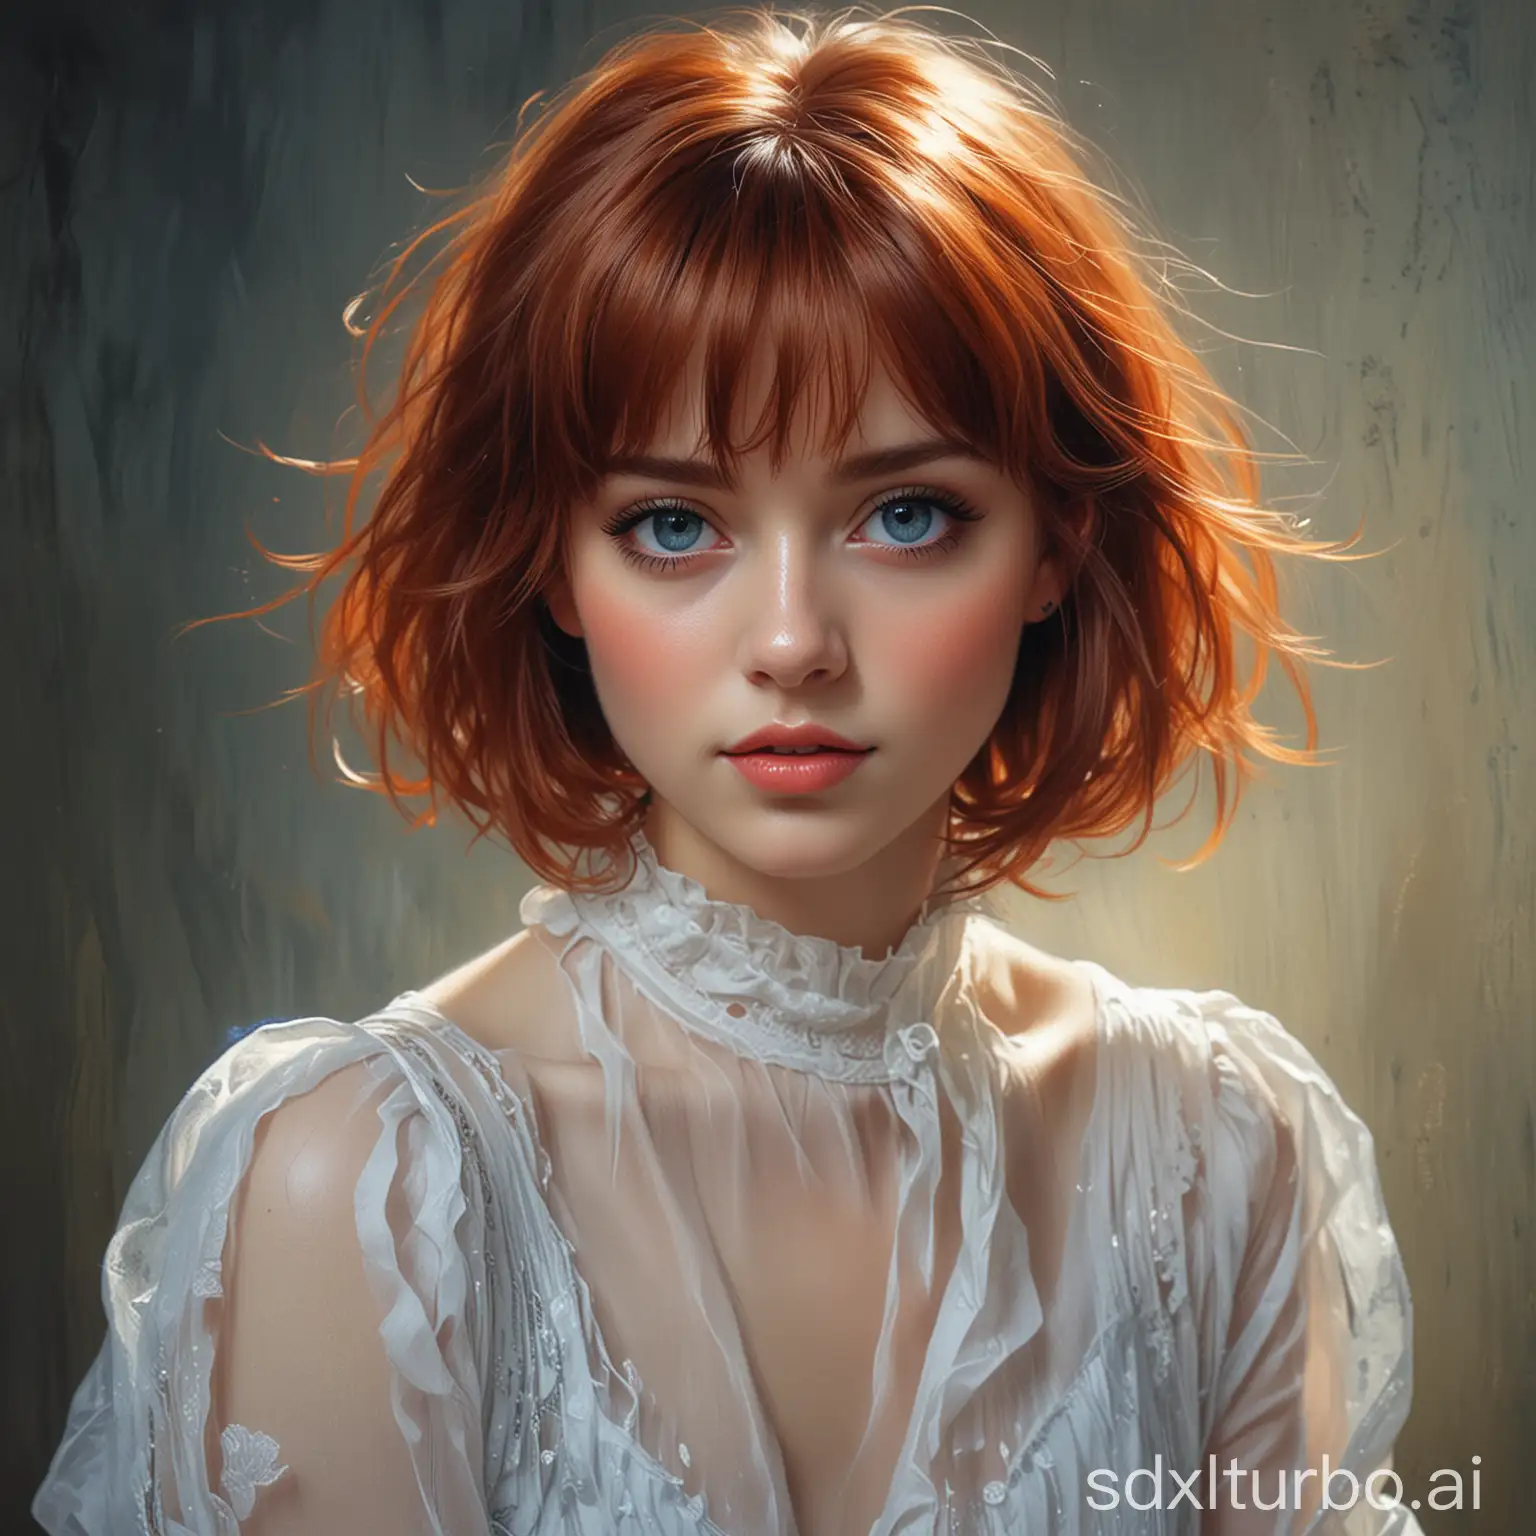 Captivating-RedHaired-Woman-in-Ethereal-Chiffon-Blouse-Sketch